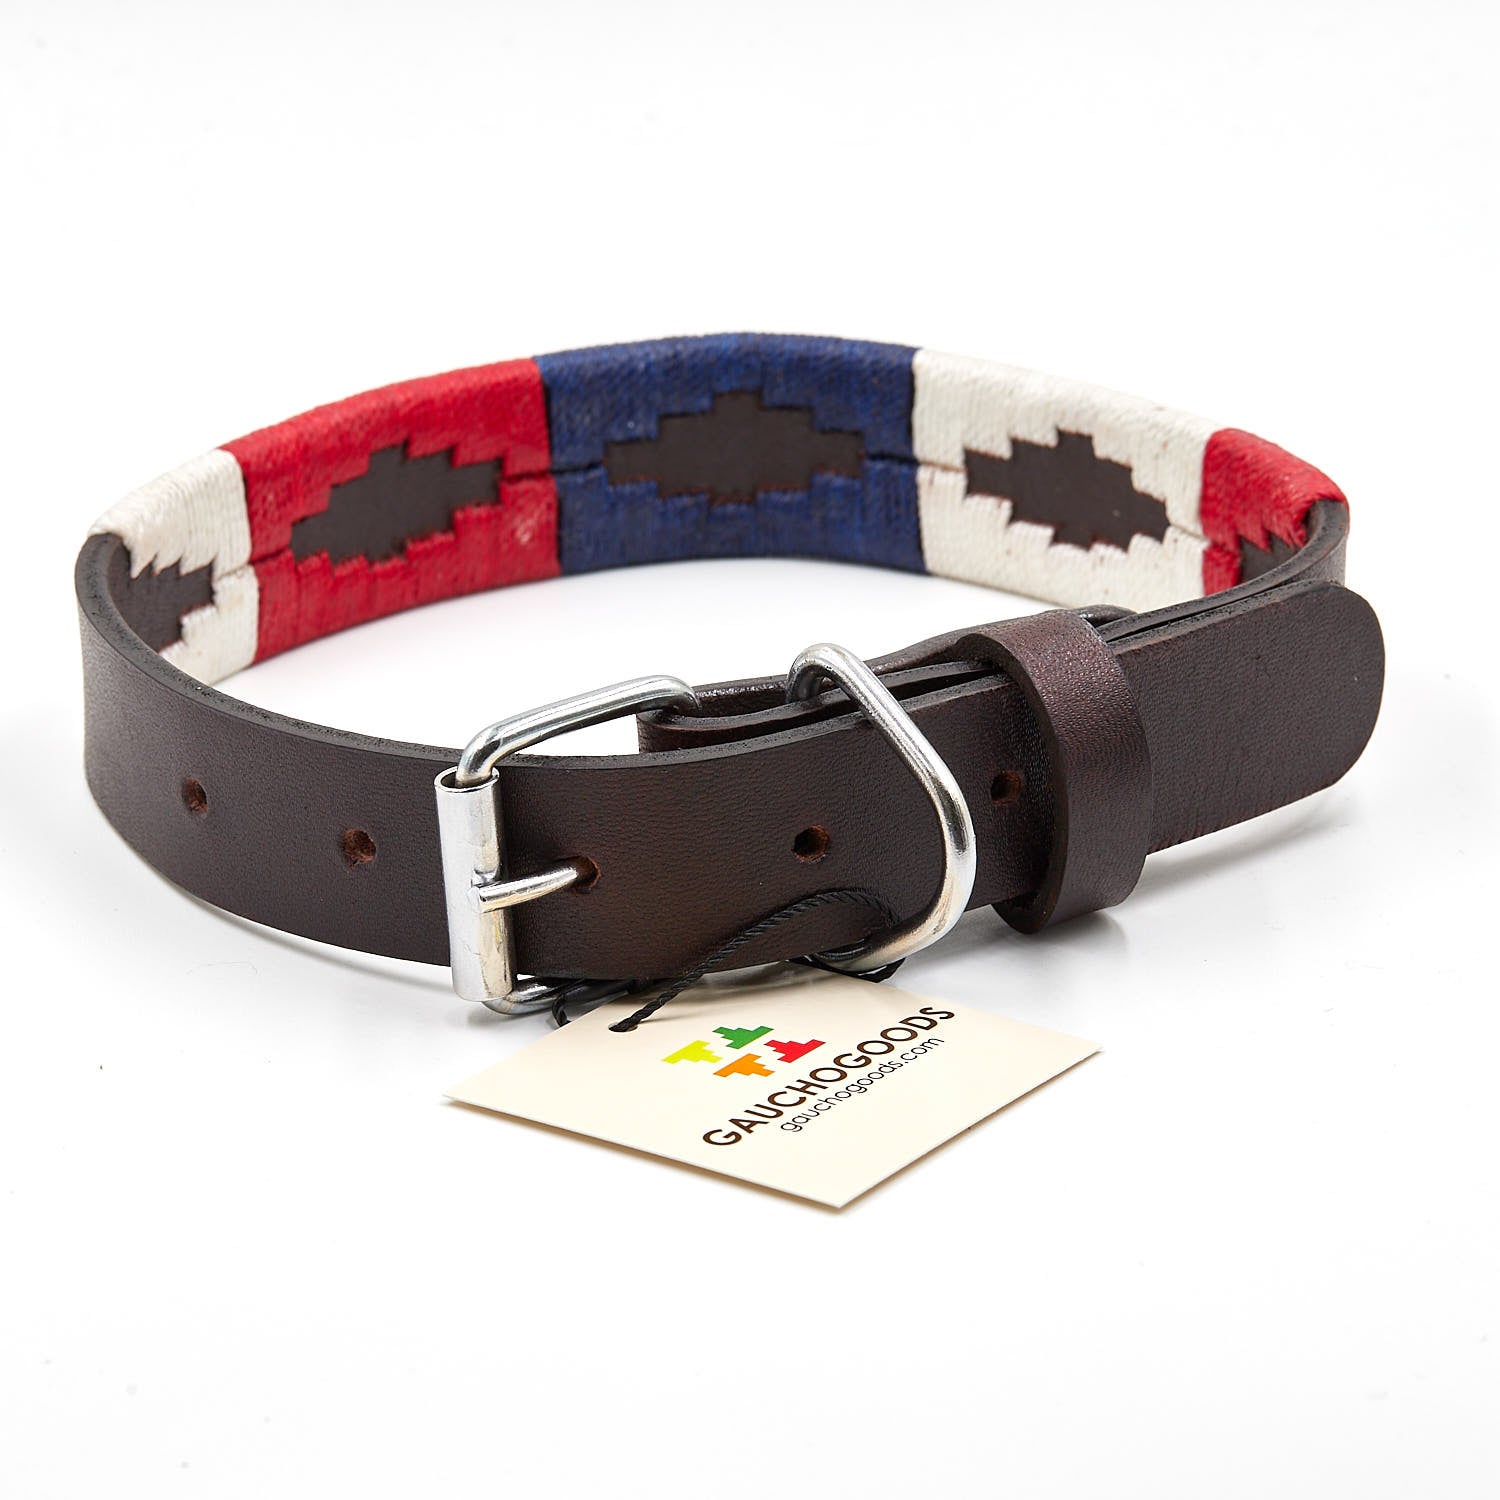 The Patriot Leather Dog Collar - hand-stitched with the distinctive red, white and blue of the American Flag